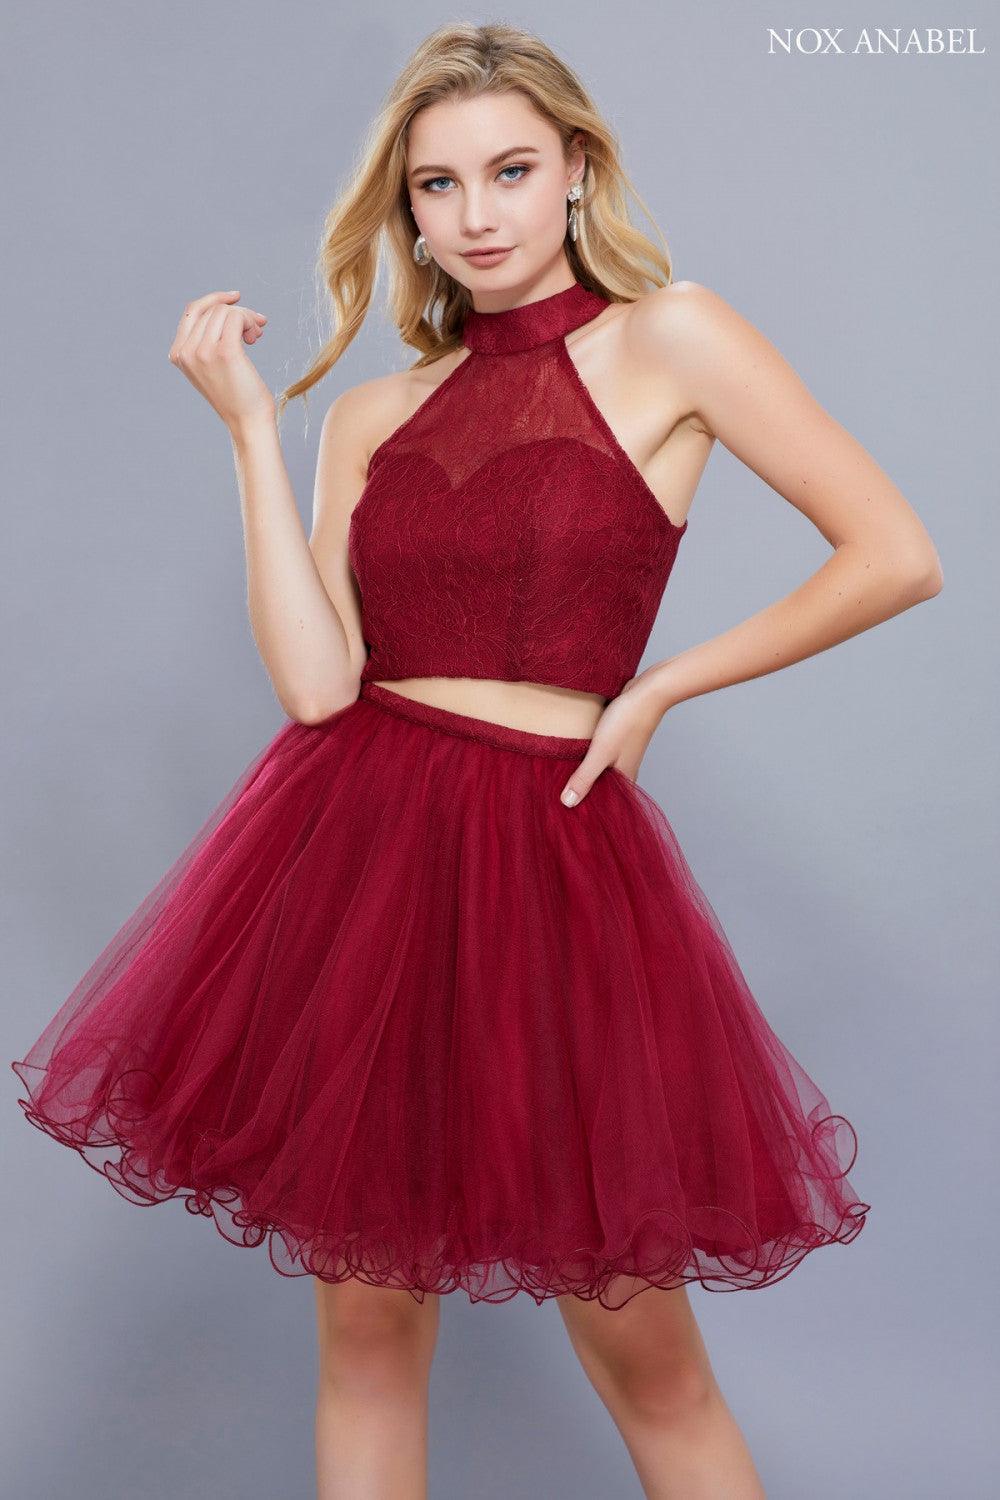 Laced Two Piece Sexy Homecoming Dress - The Dress Outlet Nox Anabel